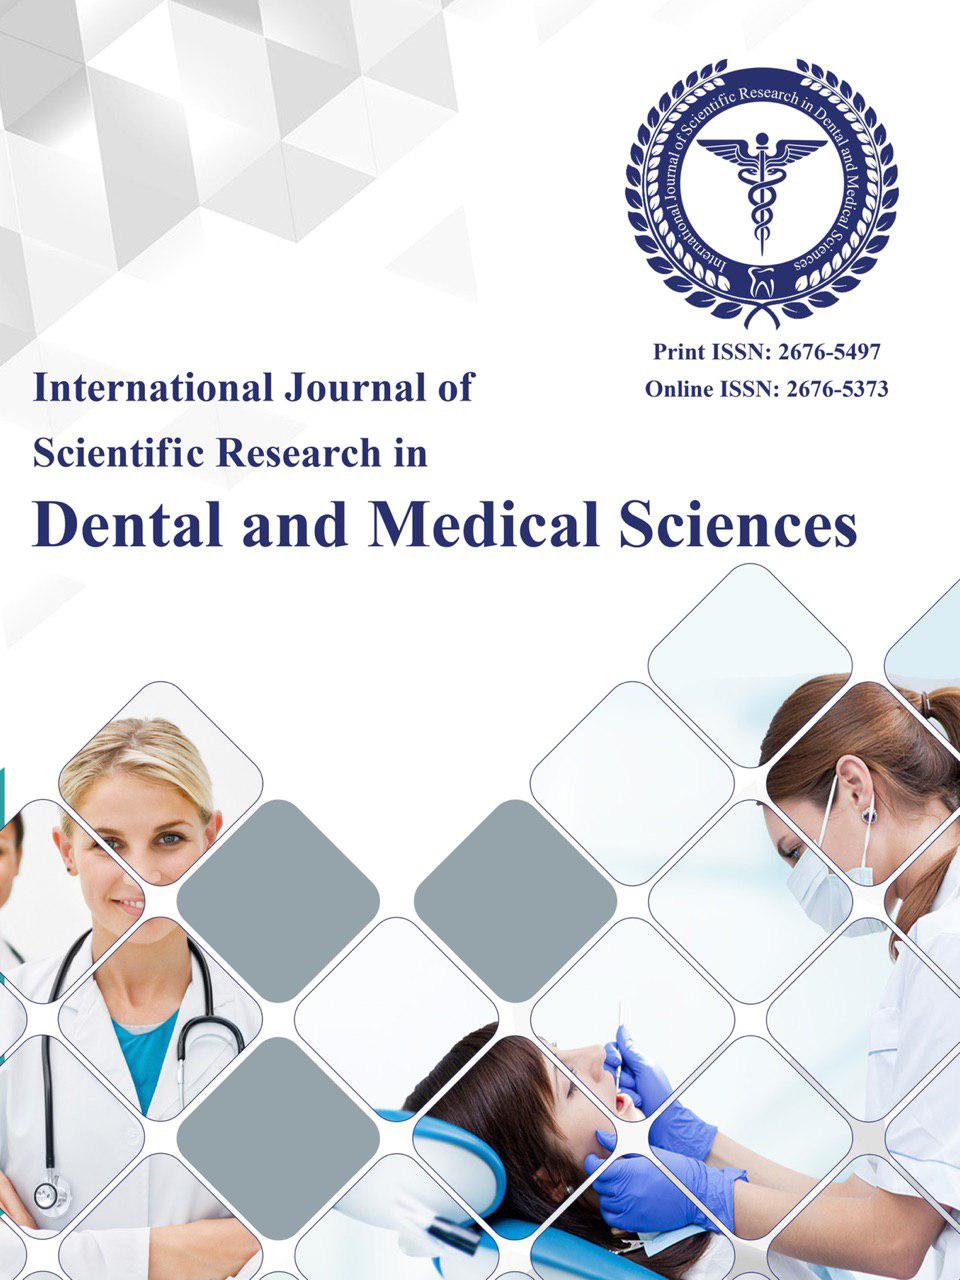 International Journal of Scientific Research in Dental and Medical Sciences